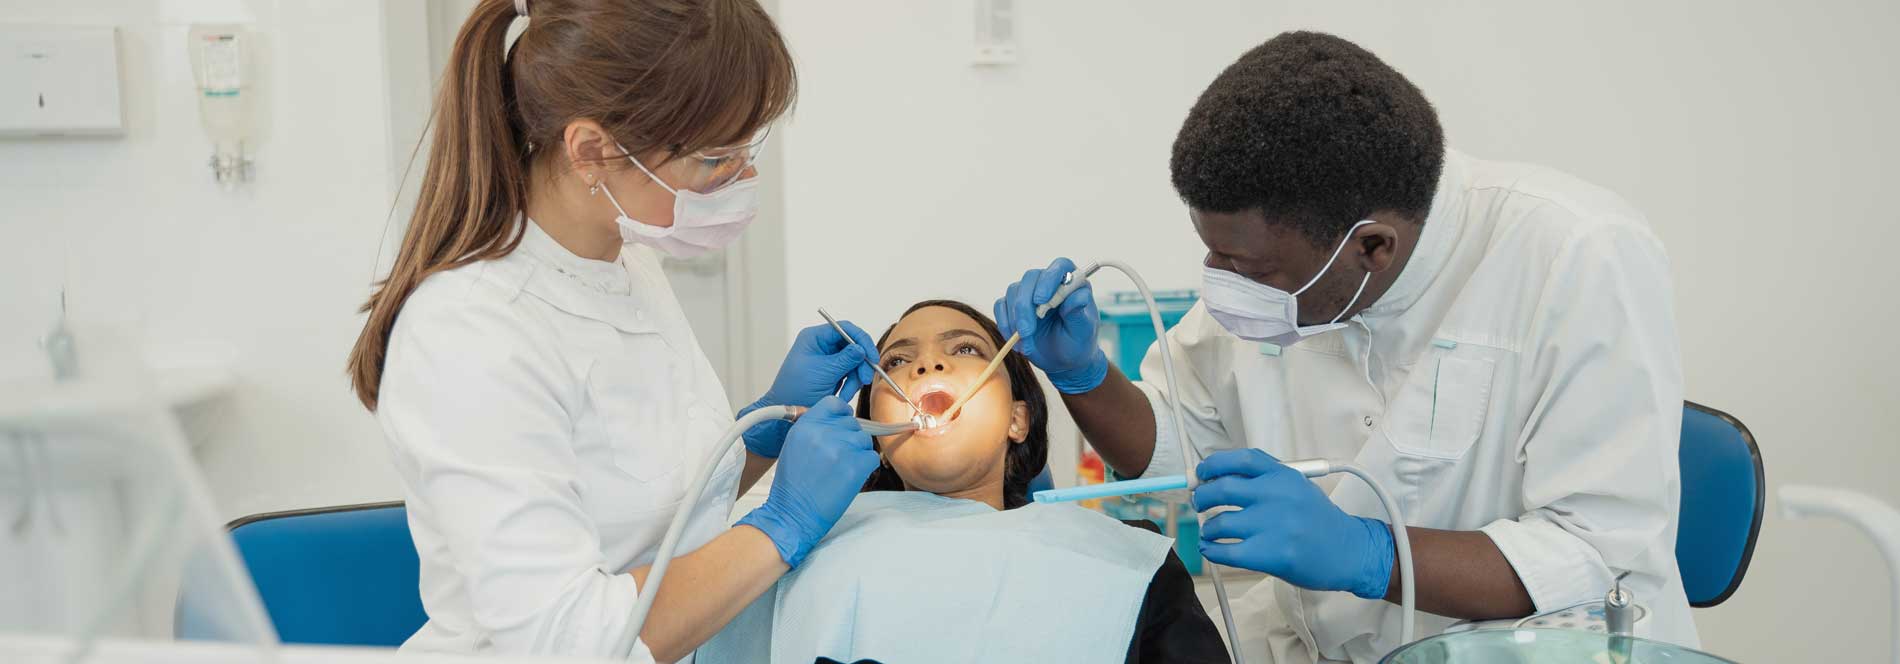 Female and male dental professionals working on female patient